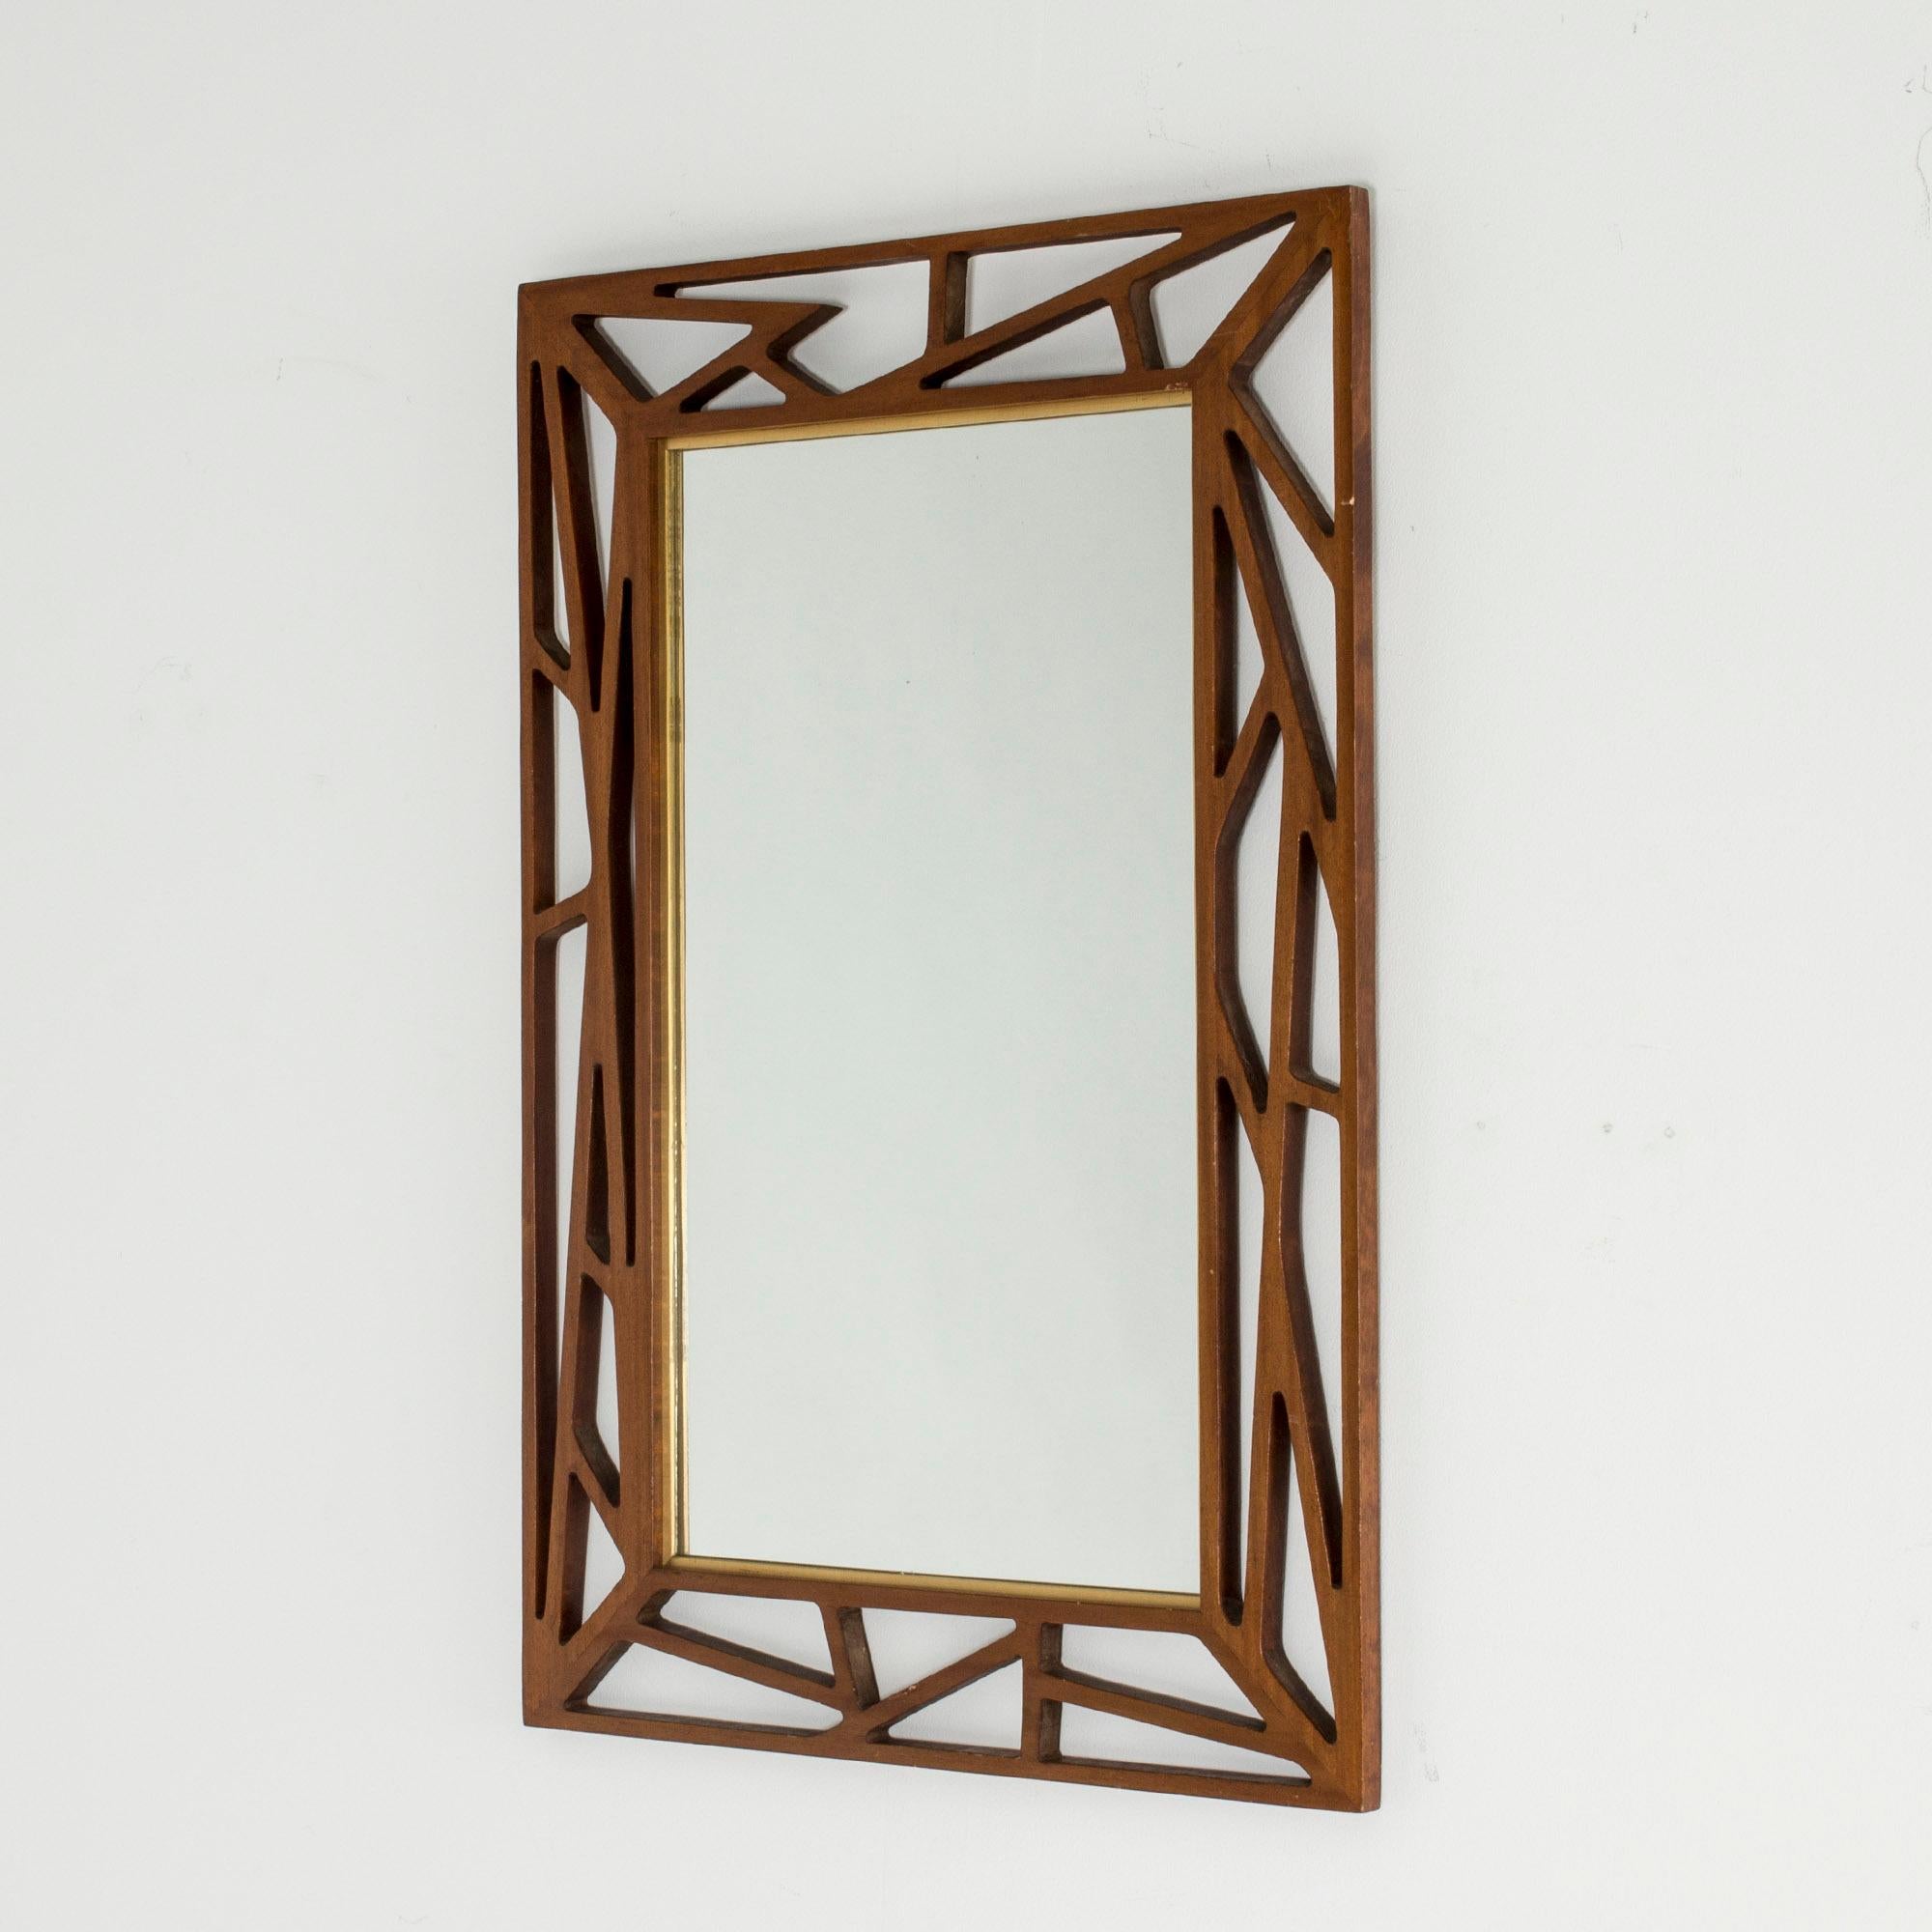 Stunning mirror from Eden Spegel, with an ornate teak frame, designed in a cutout, graphic pattern. Inner golden frame. Bold and tantalizing.